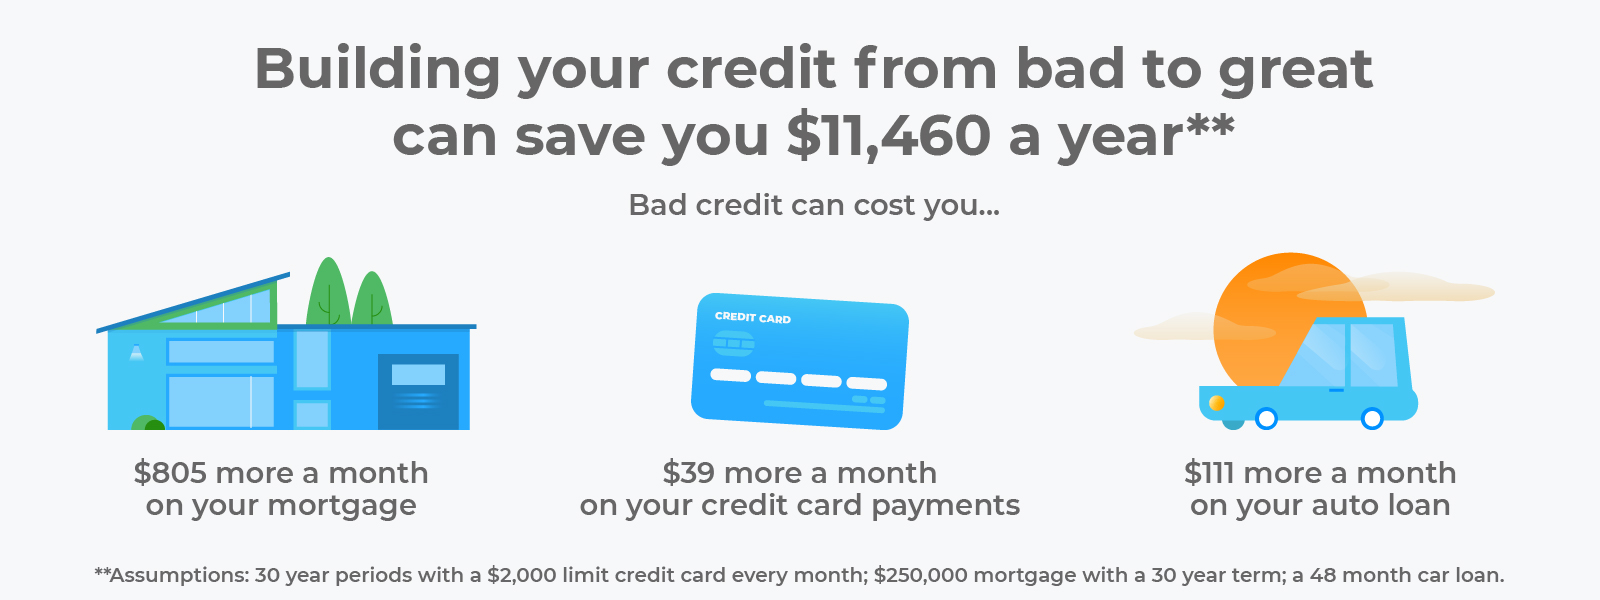 bad credit could cost you